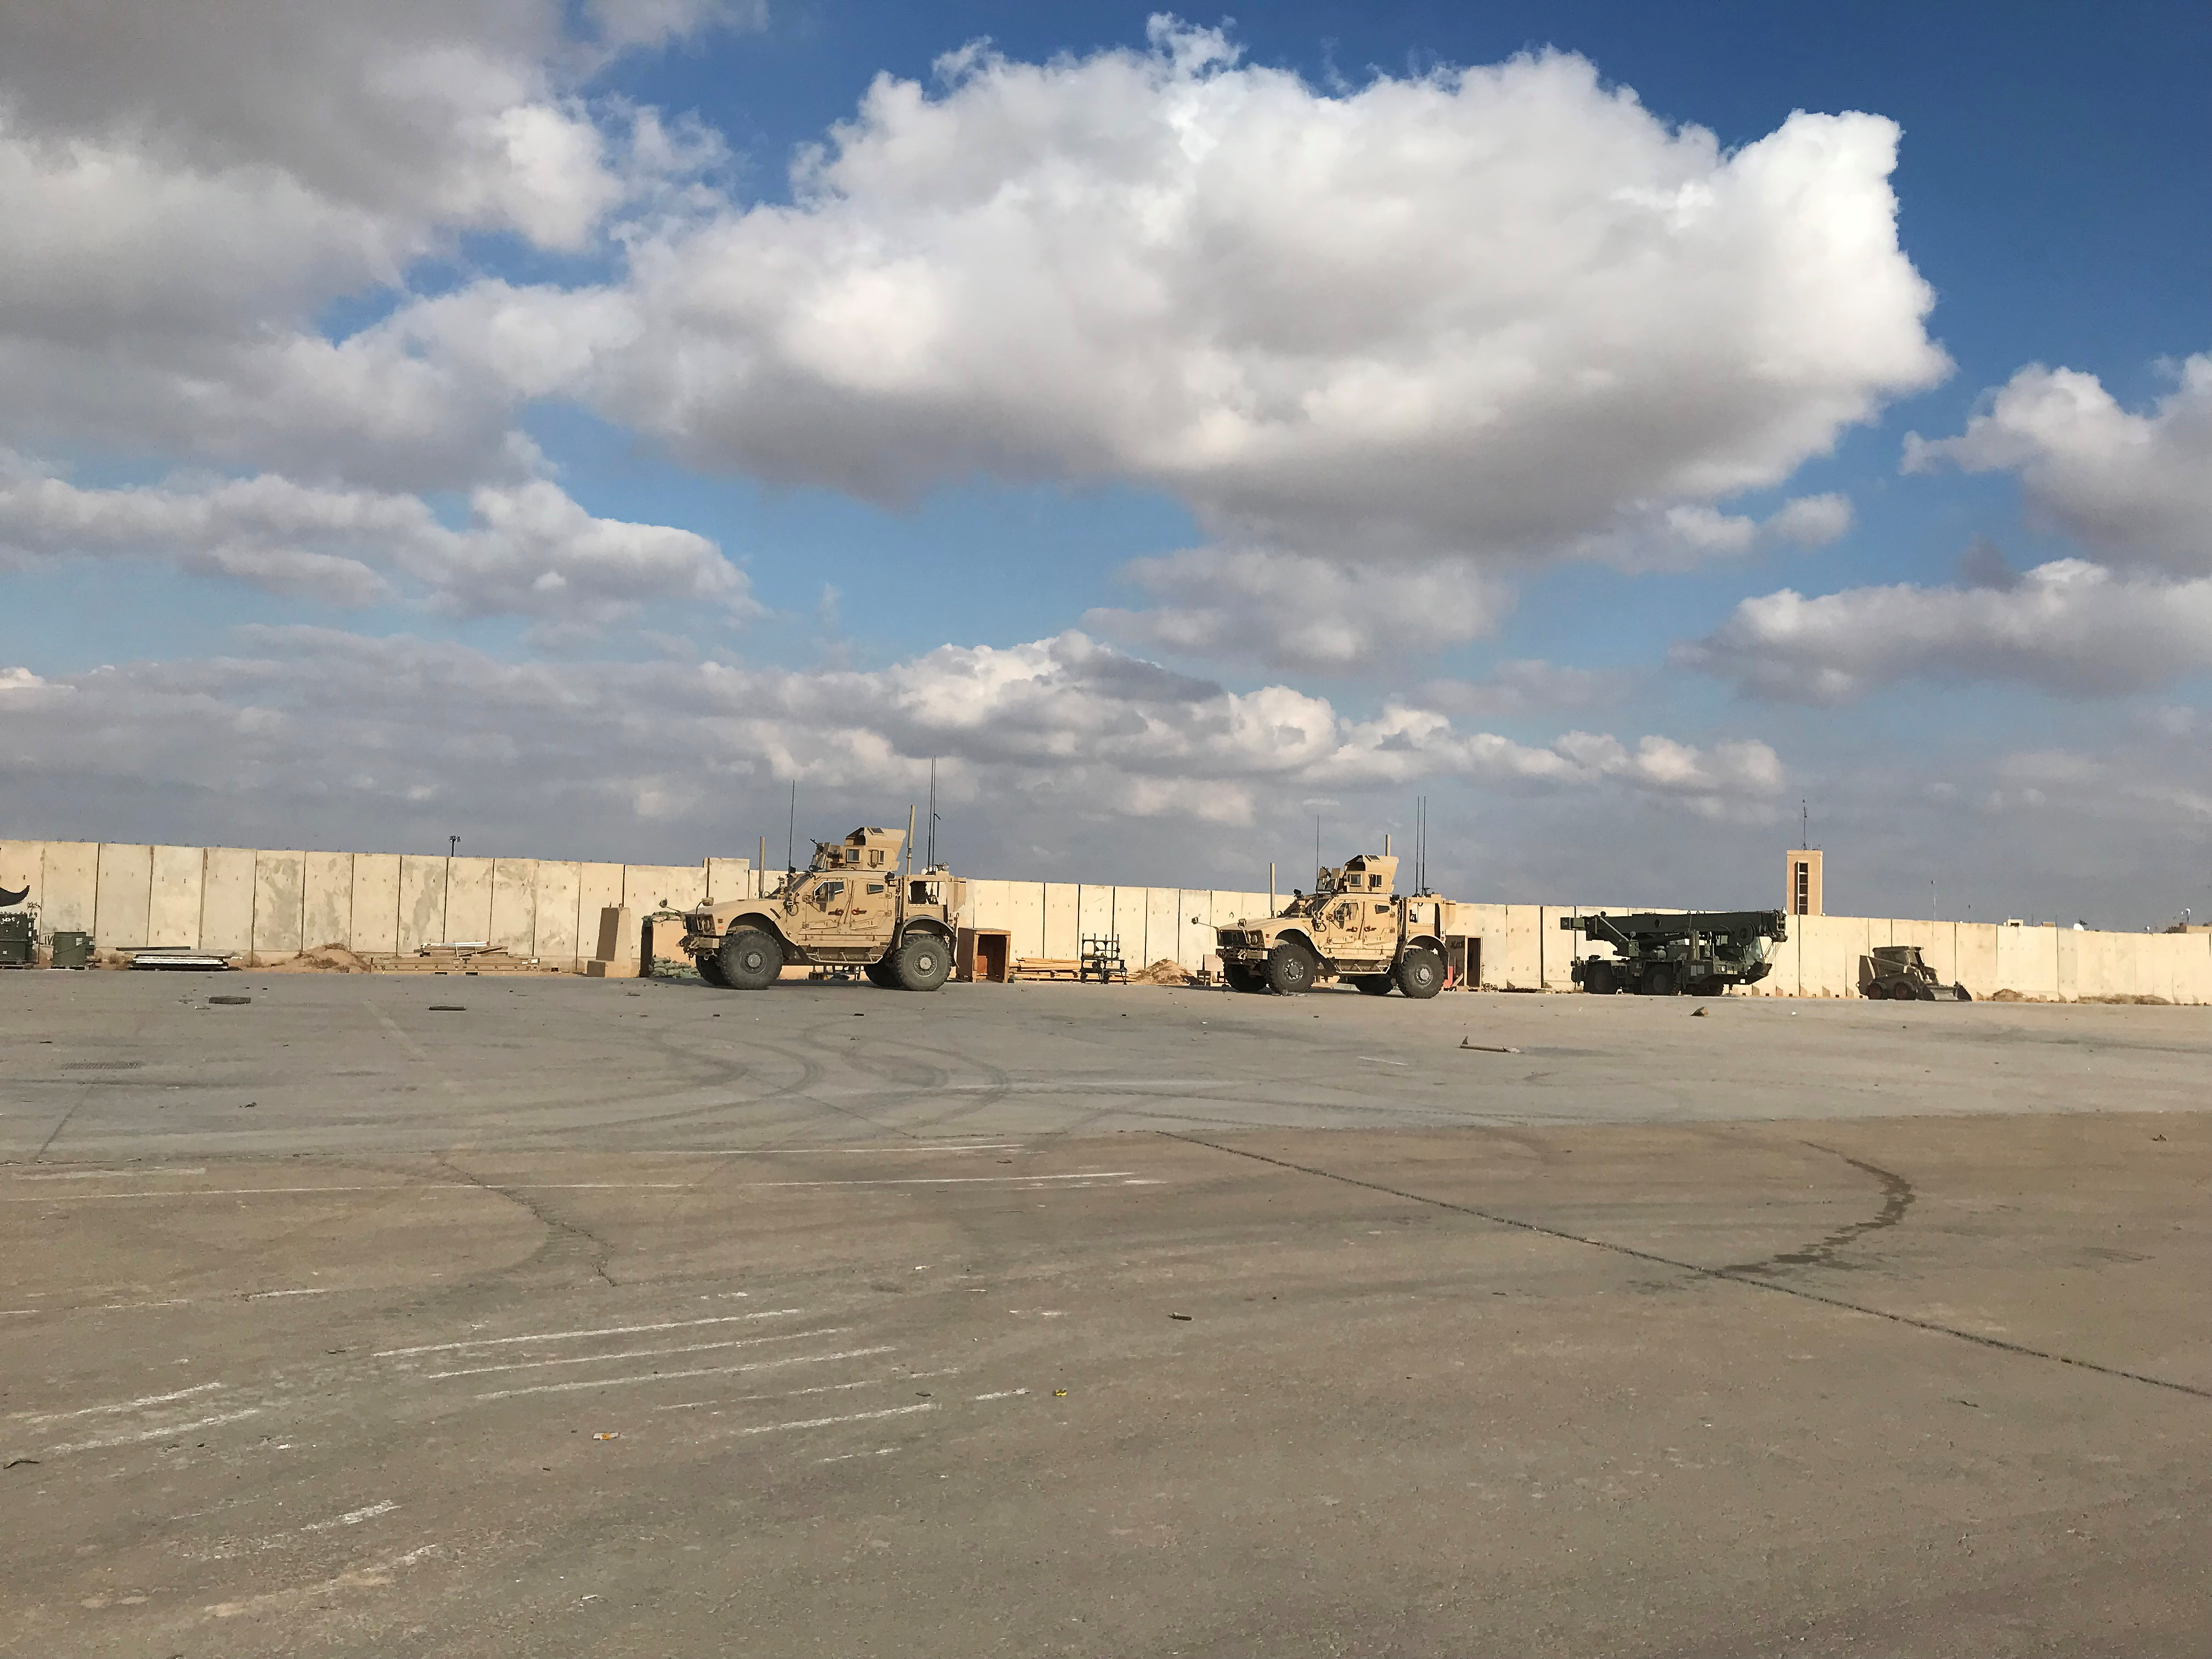 Military vehicles of U.S. soldiers are seen at Ain al-Asad air base in Anbar province